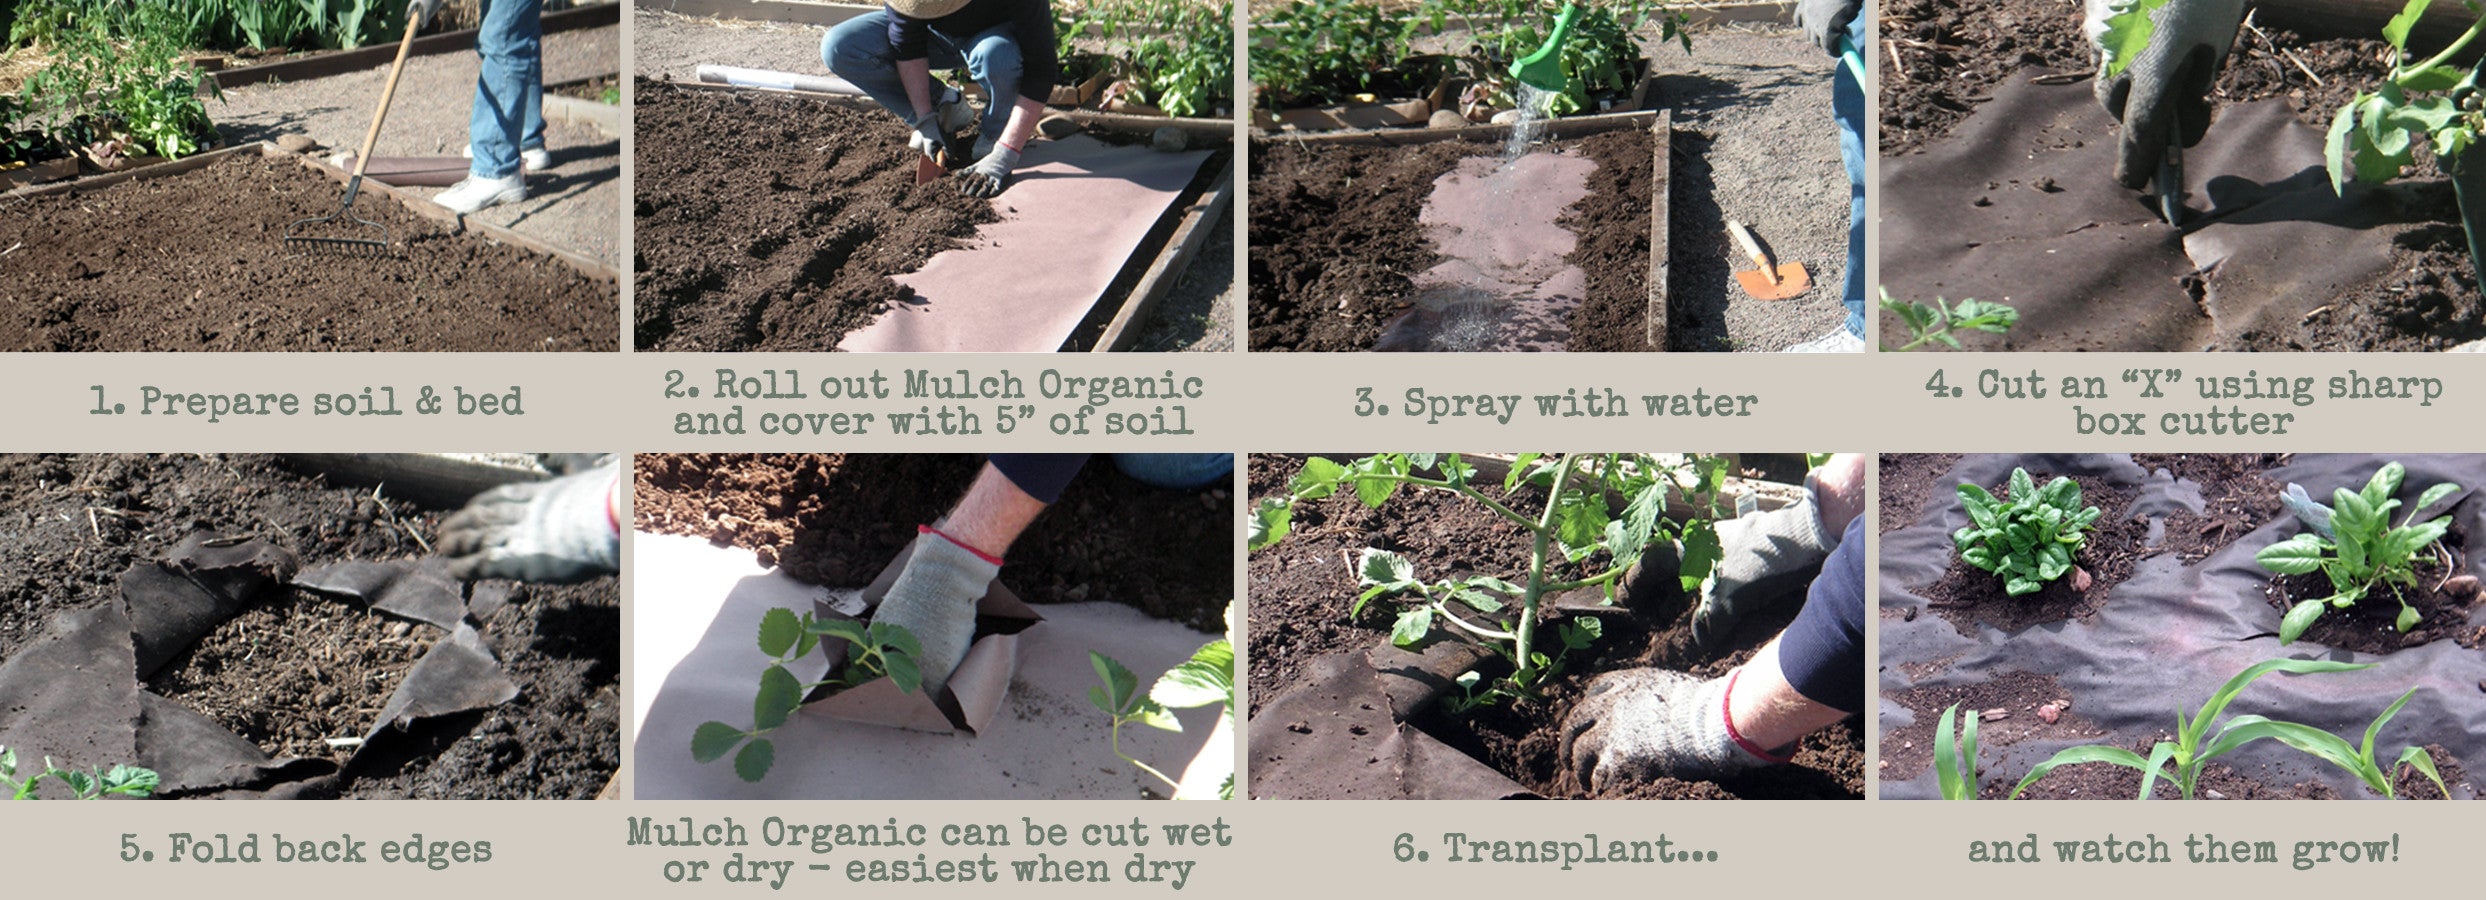 How to lay paper mulch onto the soil 